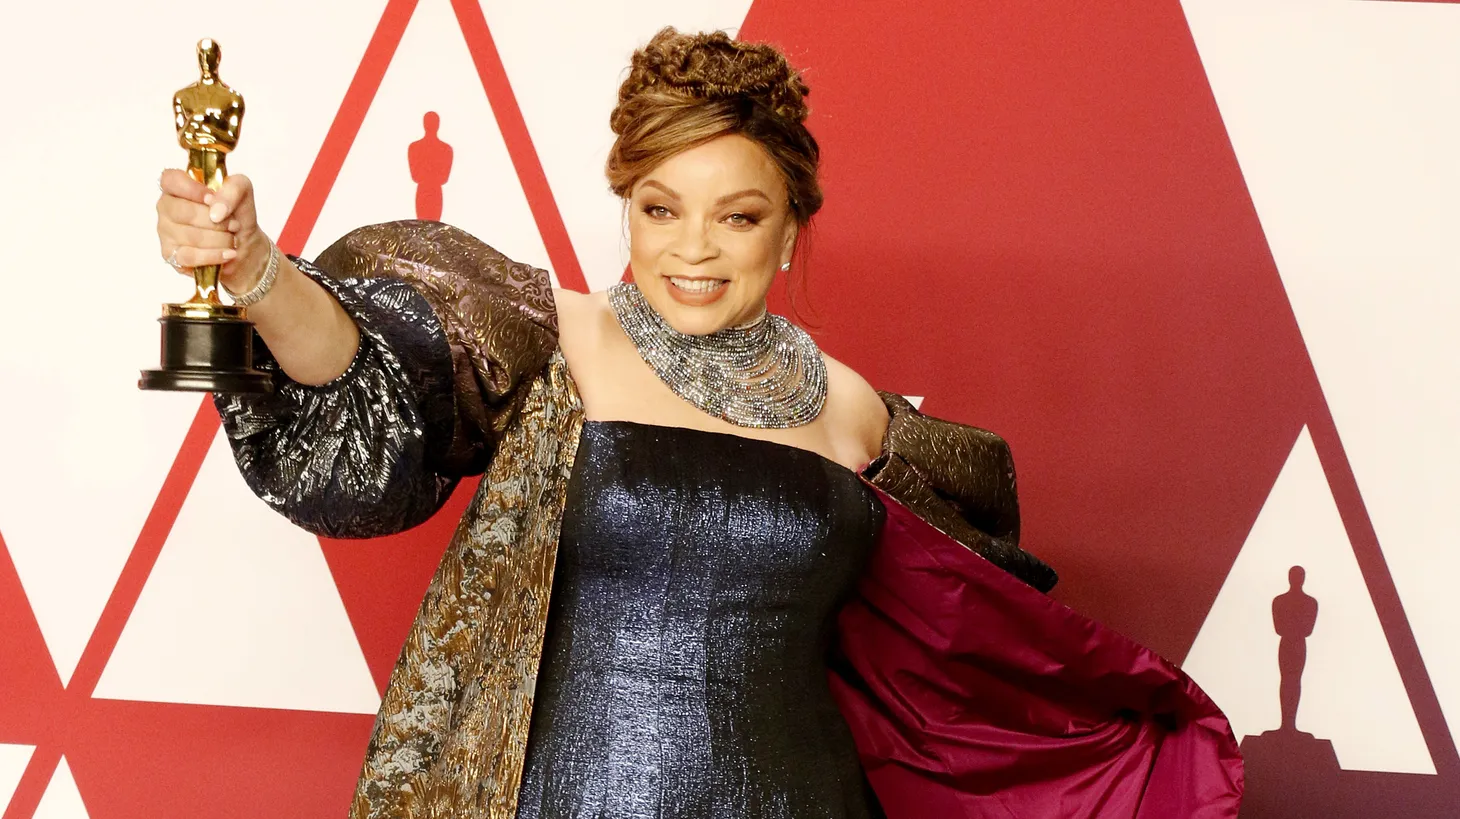 Custom designer Ruth E. Carter has won two Oscars. Here, she shows off her first for “Black Panther” during the 91st Annual Academy Awards held on February 24, 2019.